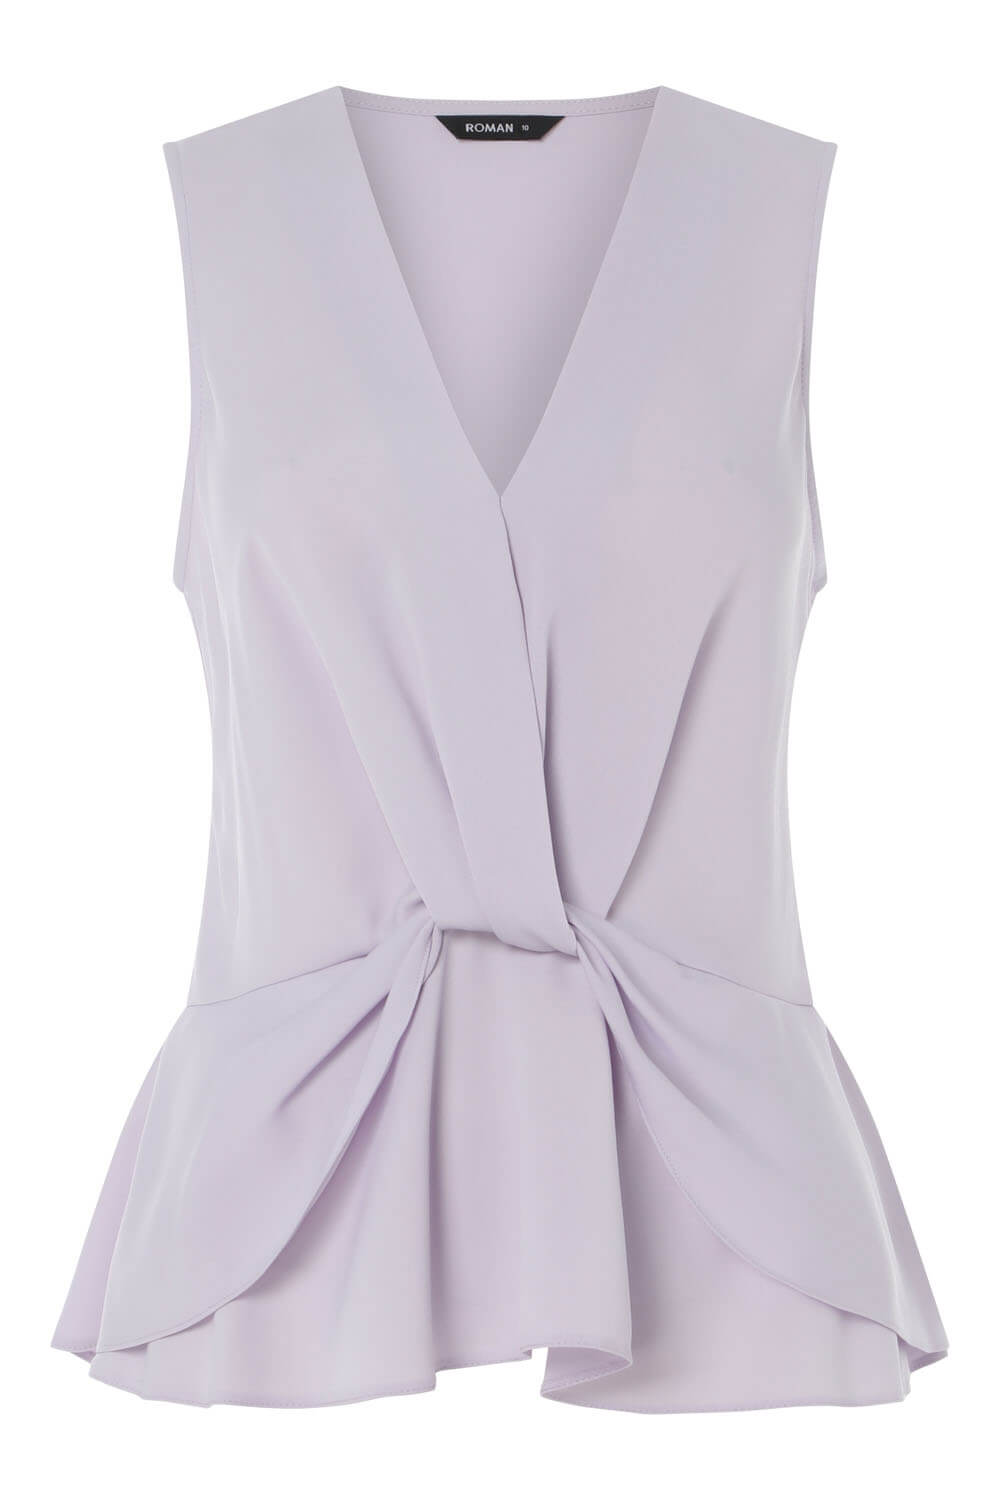 Lilac V-Neck Knot Front Top , Image 5 of 9